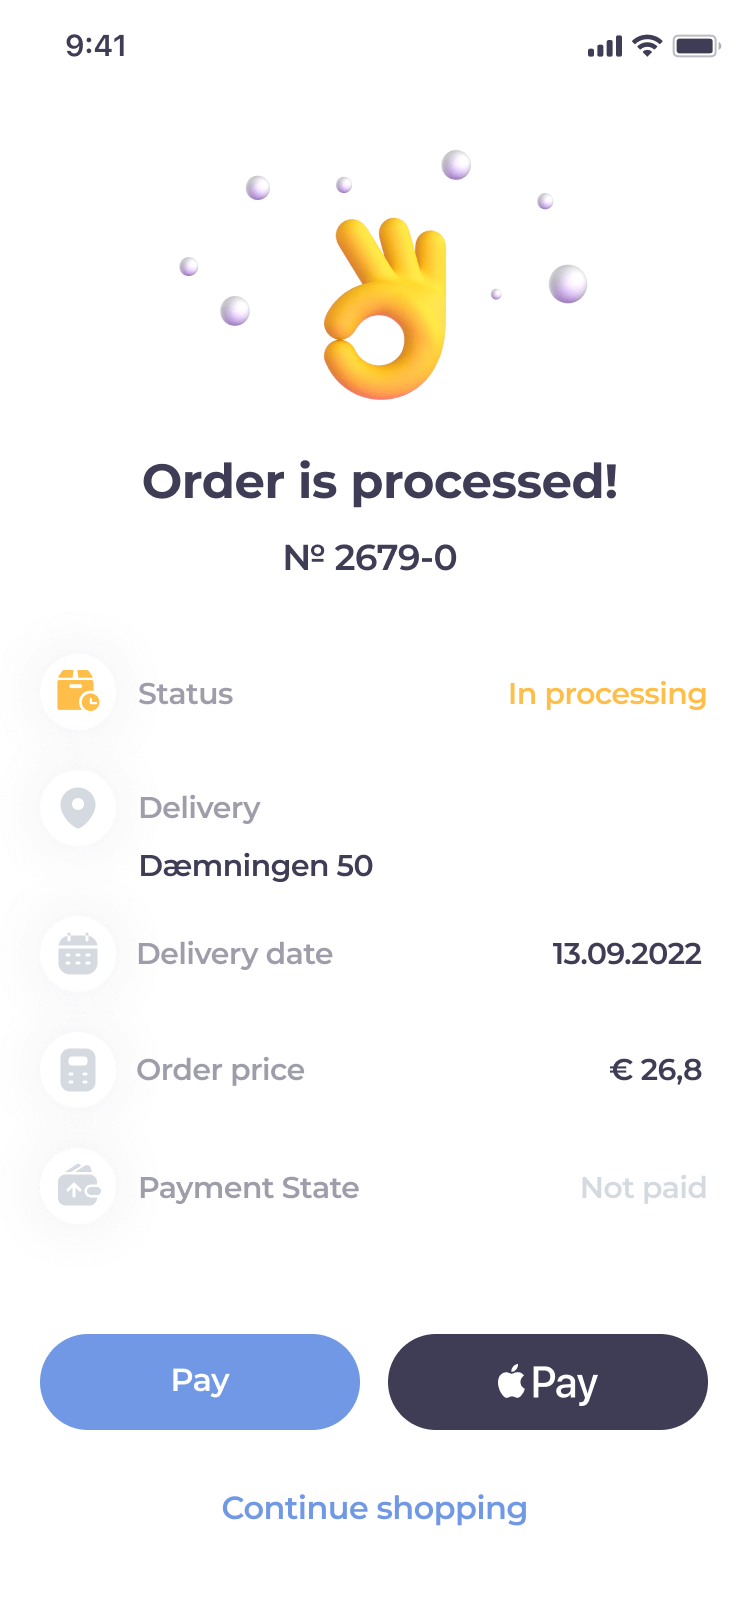 Easy ordering and payment